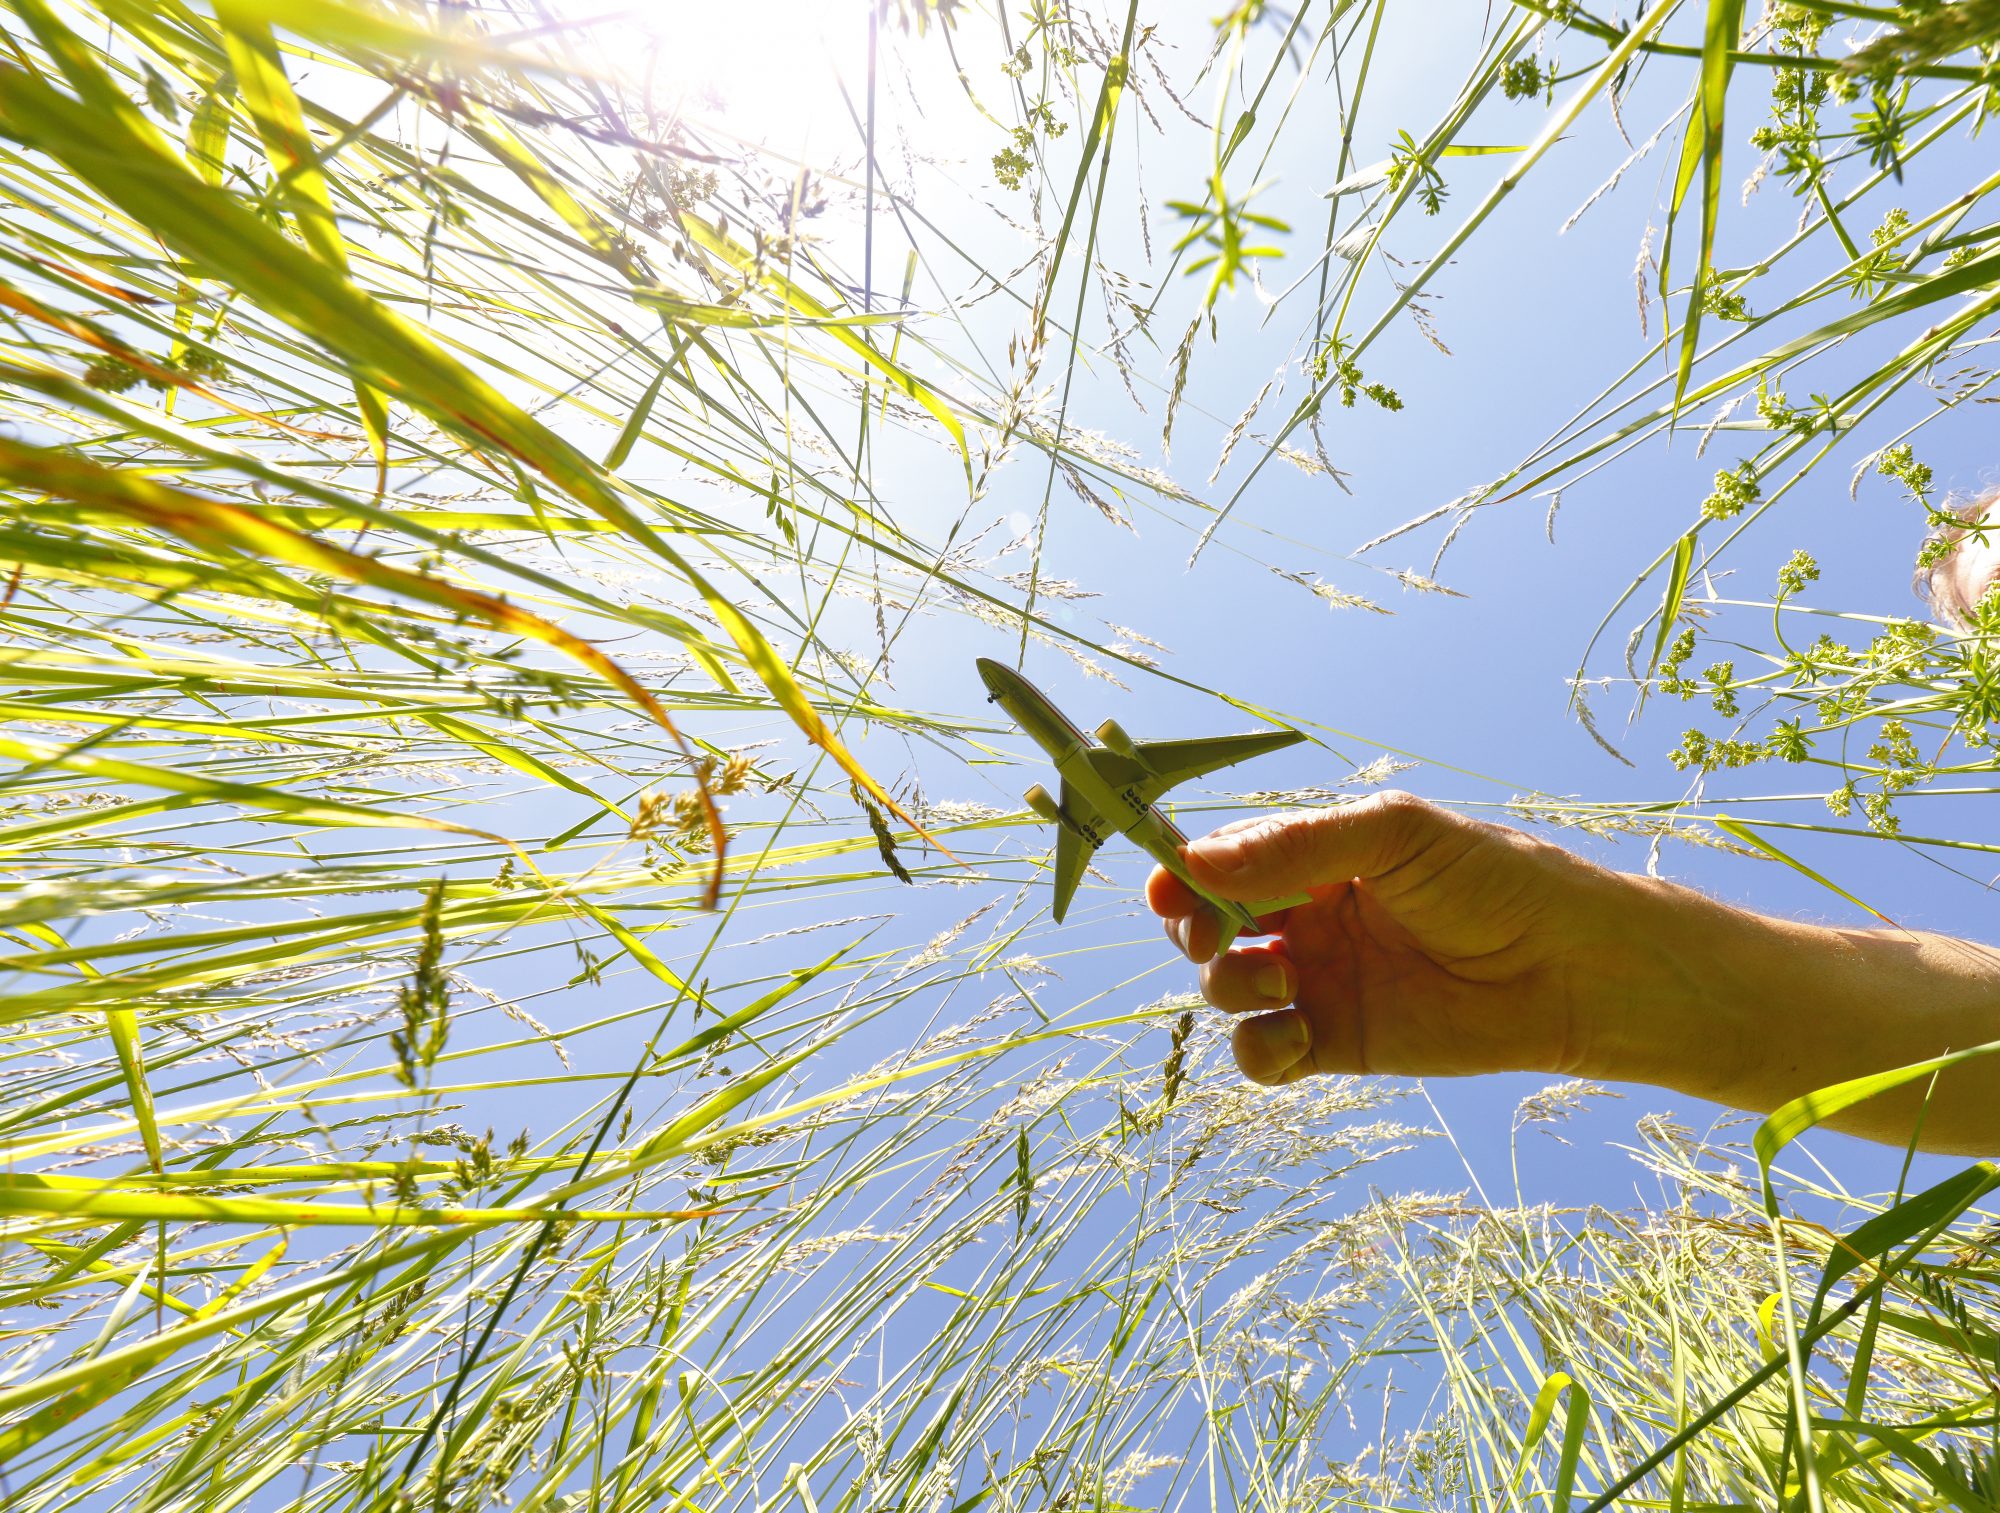 Miniature airplane model over a blooming meadow.